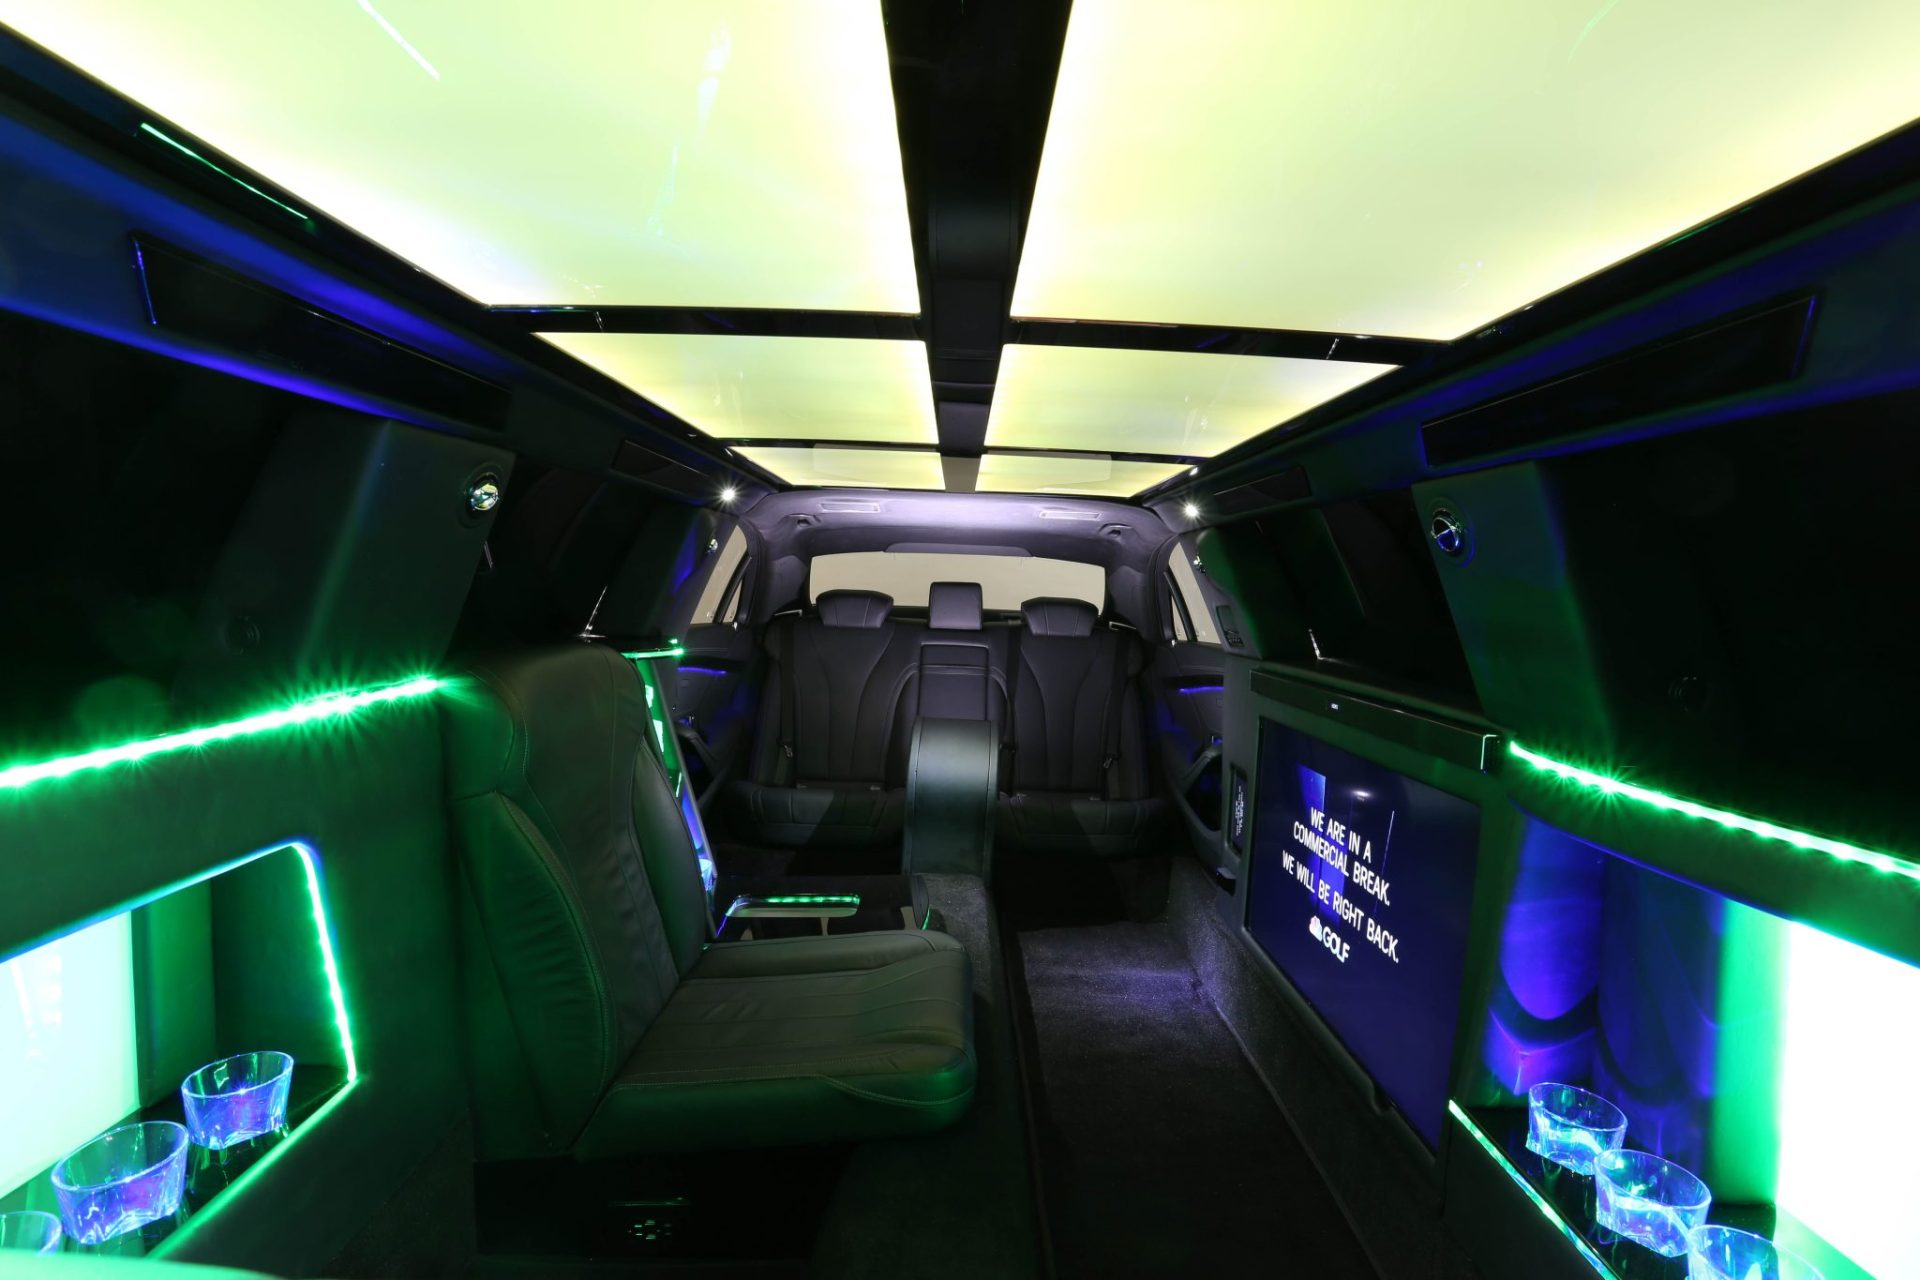 Mercedes Benz S-Class Stretched Limousine - Interior Photo #41